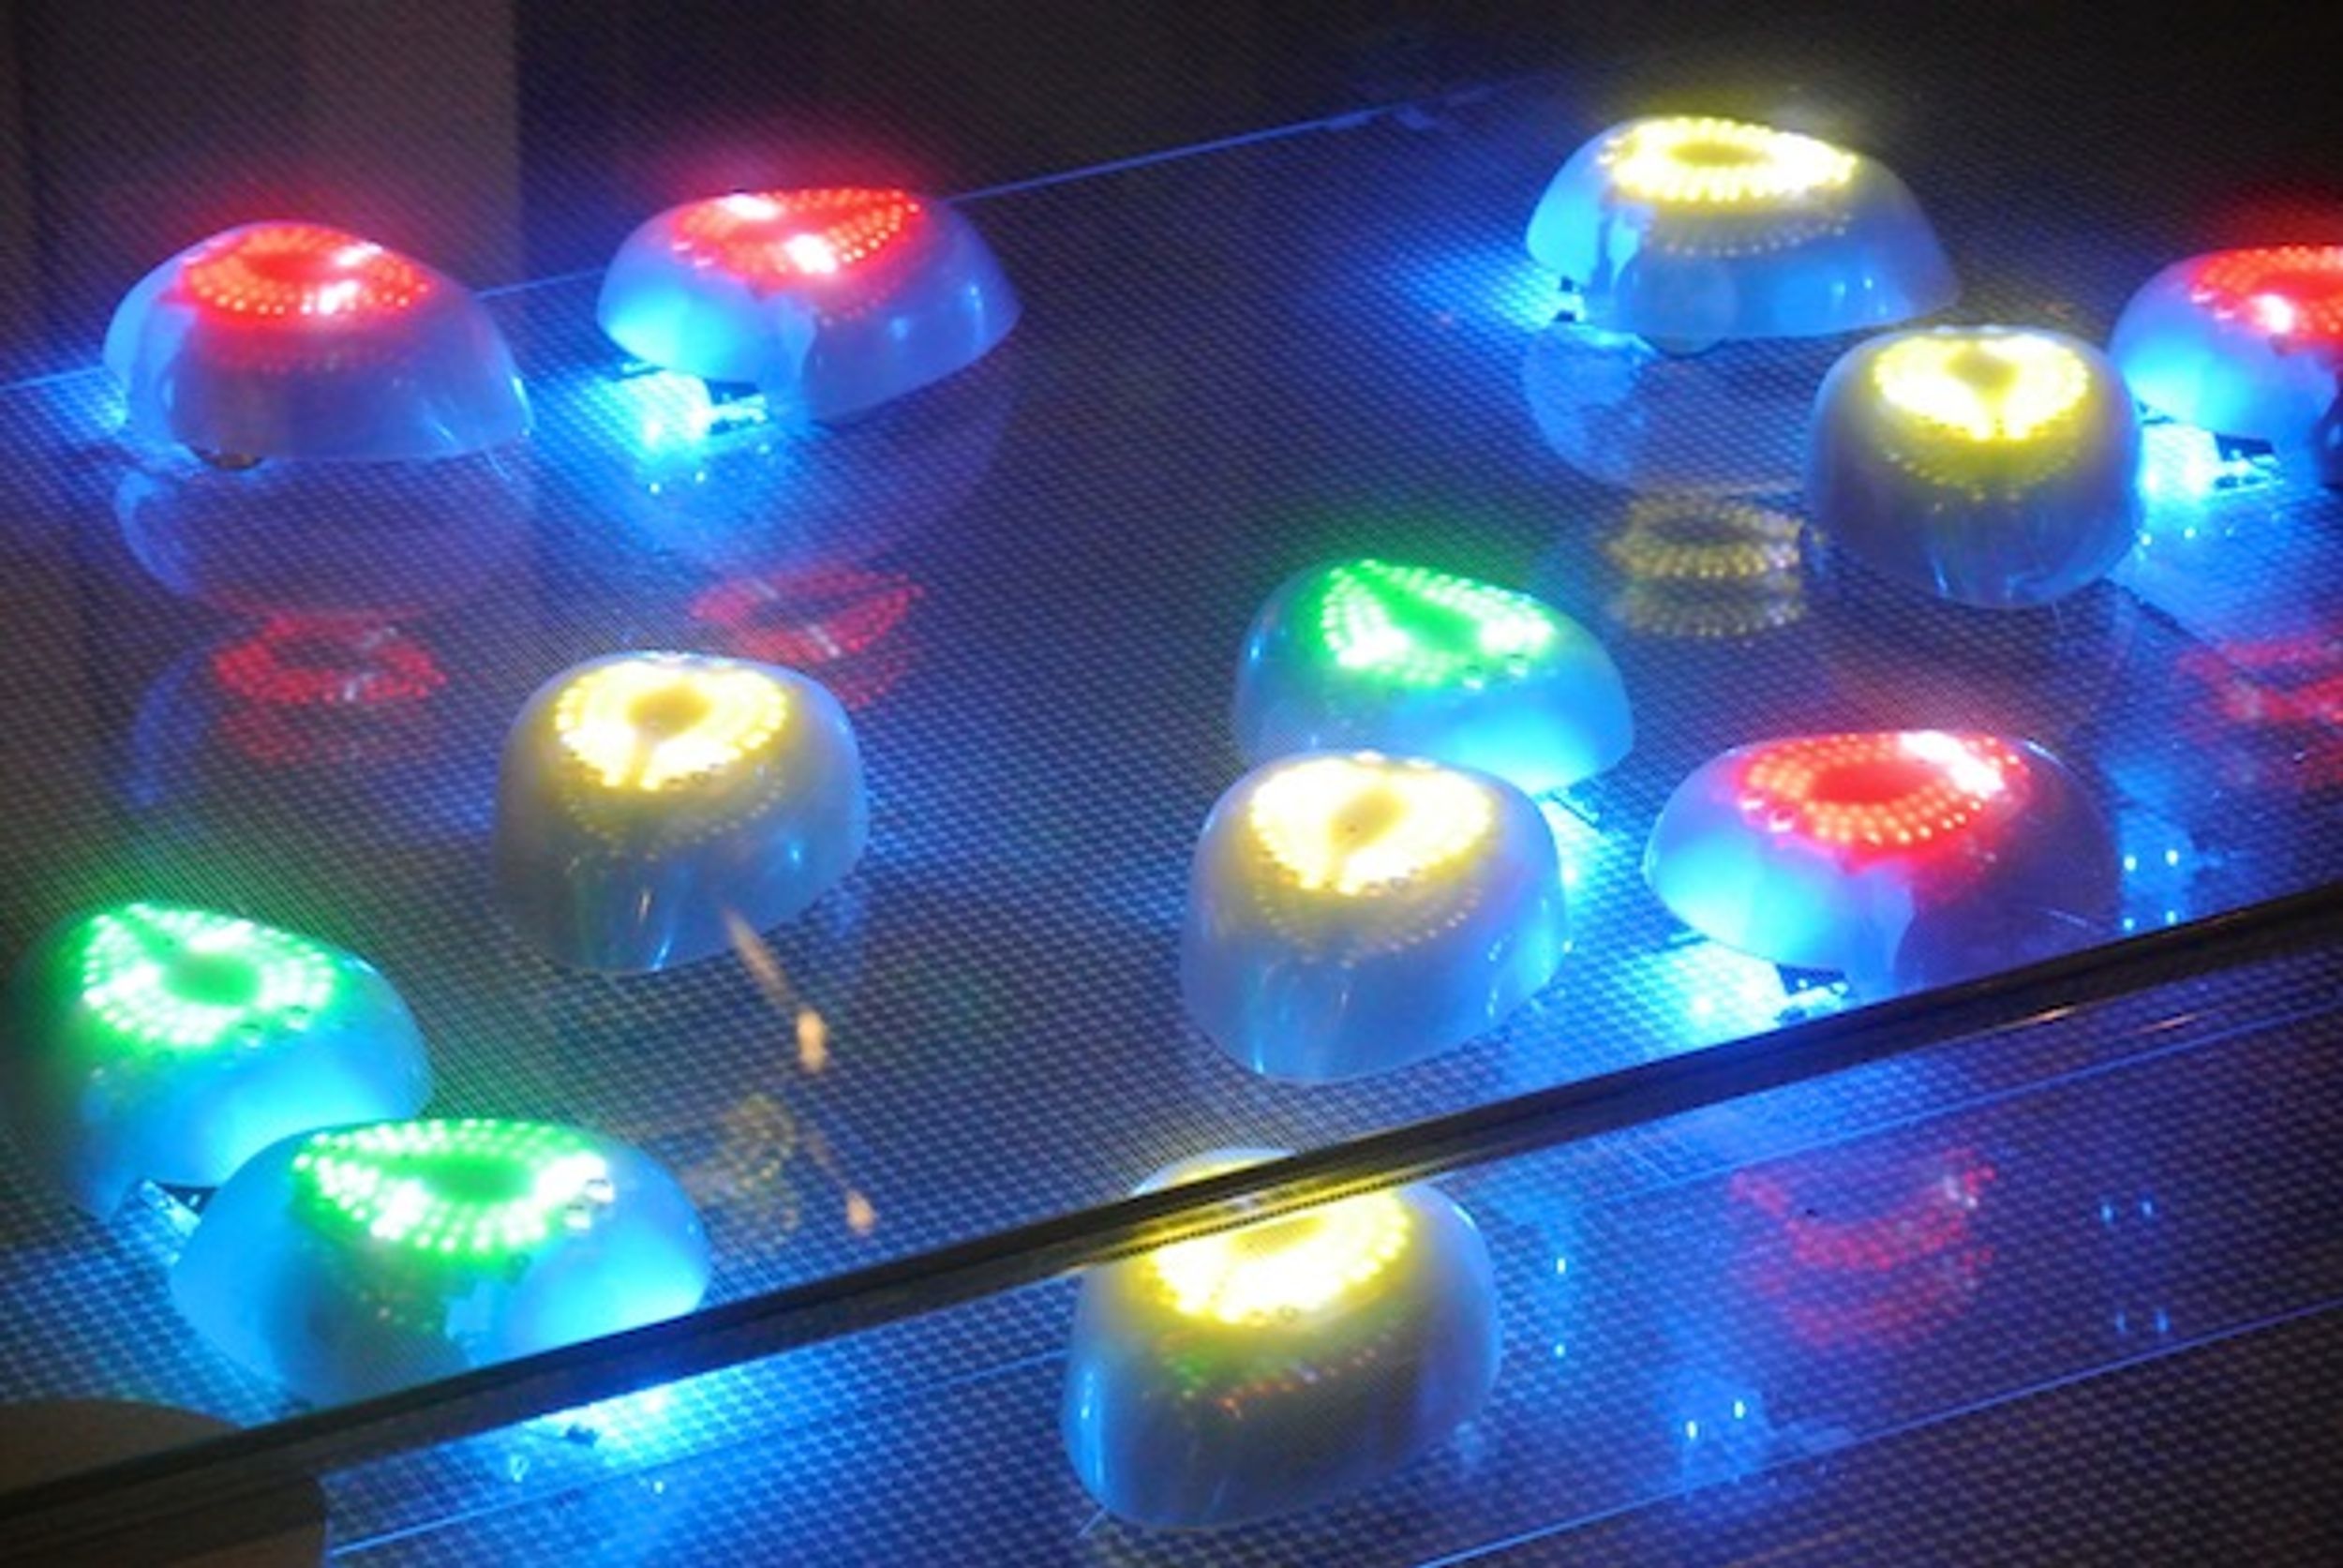 A group of ovoid robots underneath a transparent floor, illuminated by yellow, green, or red LEDs on their backs.